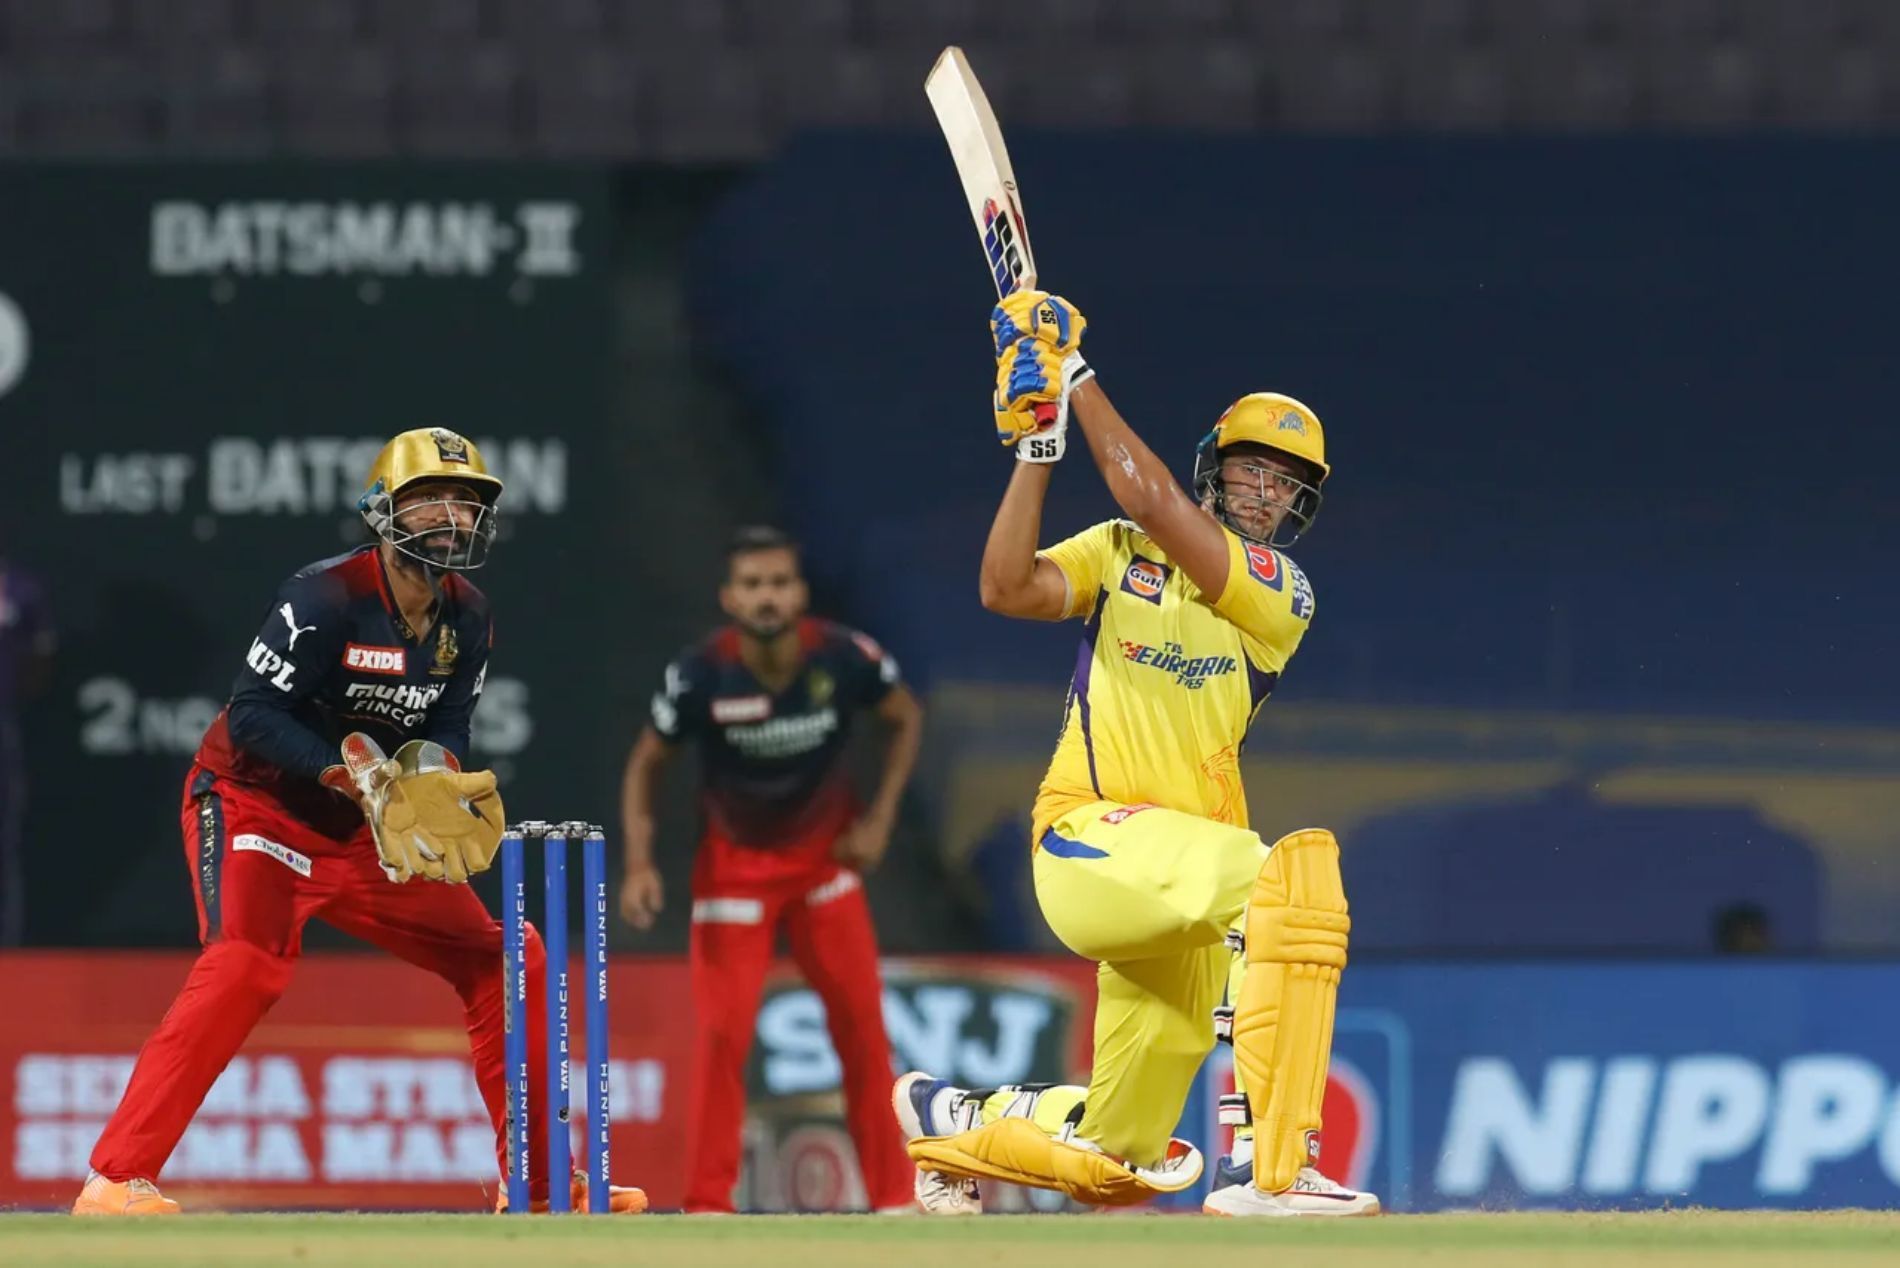 Shivam Dube was player of the match for his knock against Bangalore. Pic: IPLT20.COM